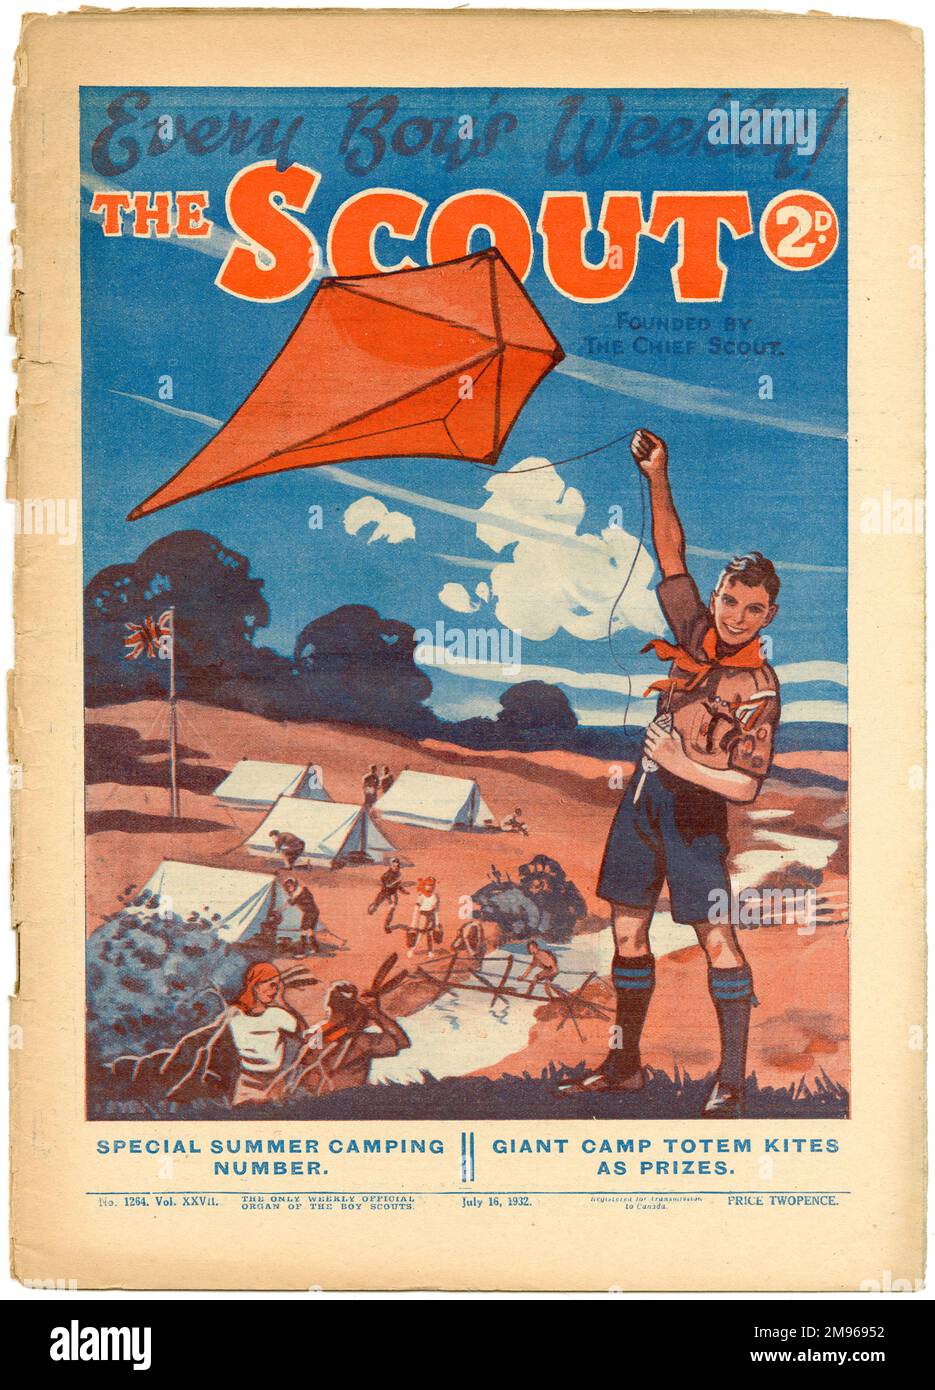 Front cover of The Scout magazine, 'the only weekly official organ of the Boy Scouts' featuring a happy boy scout flying a kite while all his fellow scouts carry out the manly tasks of pitching tents, gathering firewood and building bridges. Stock Photo